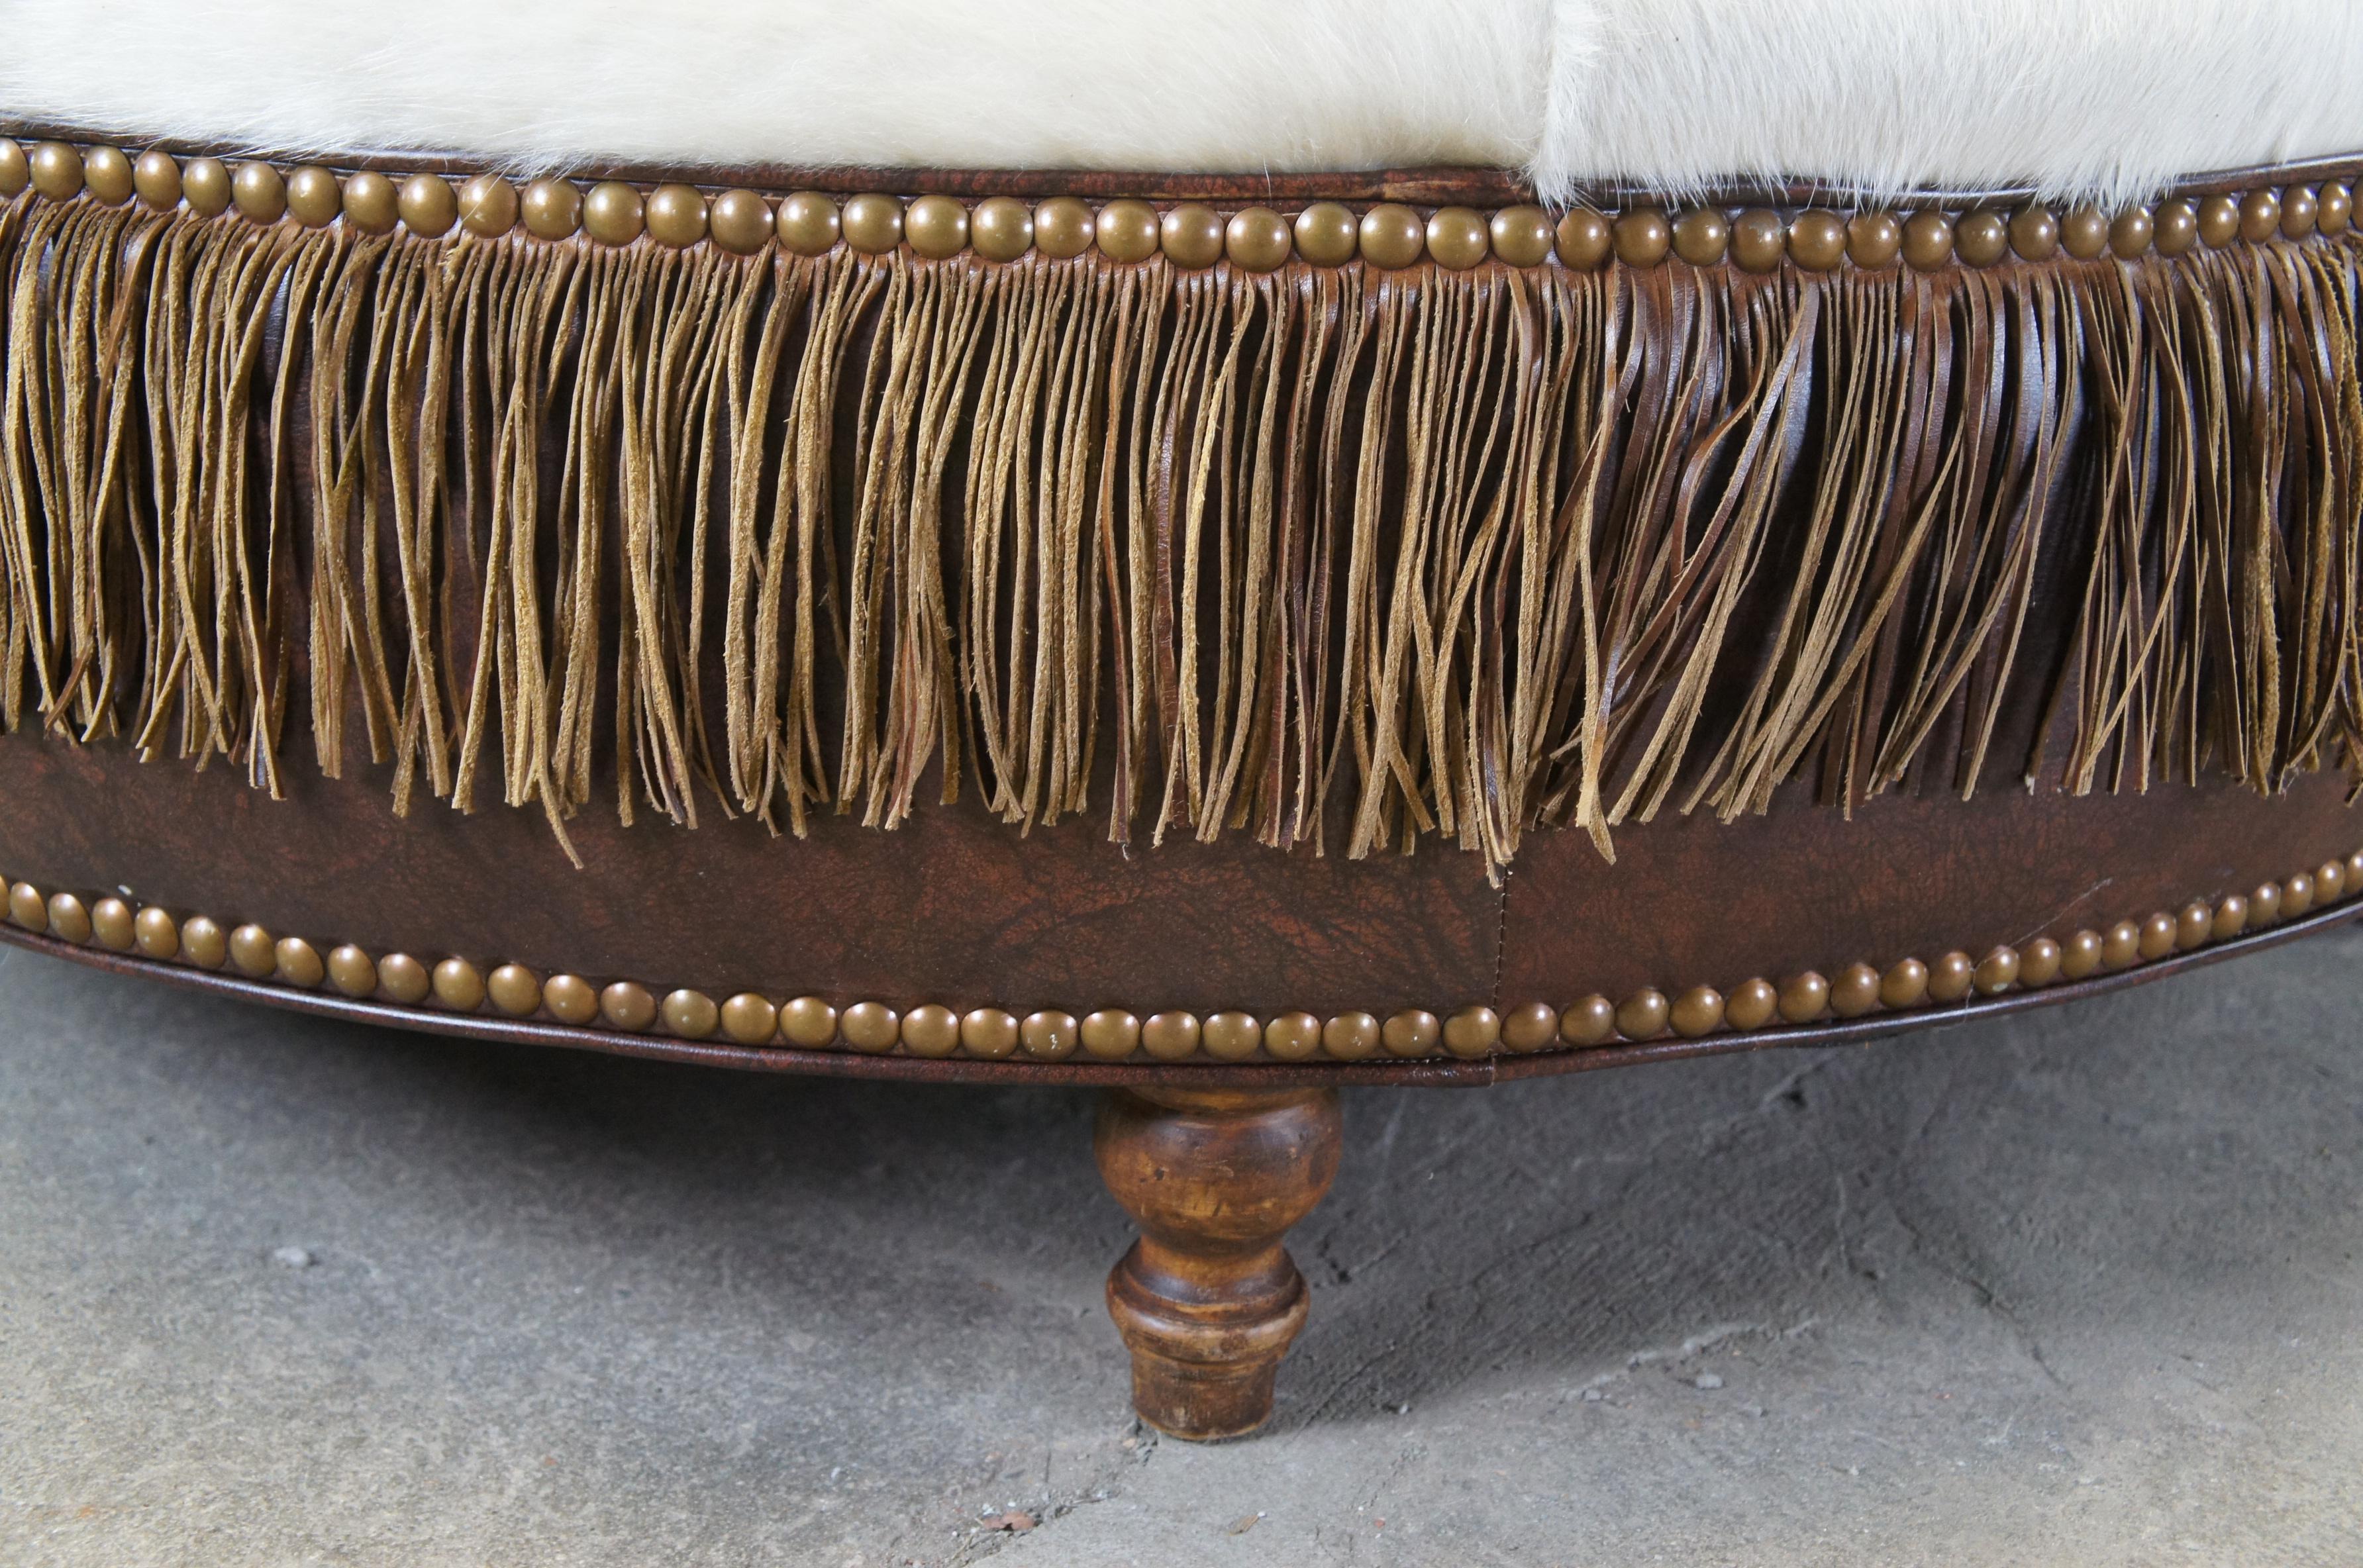 Rustic Vintage Round Leather Cowhide Fringed Ottoman Southwestern Brown & White